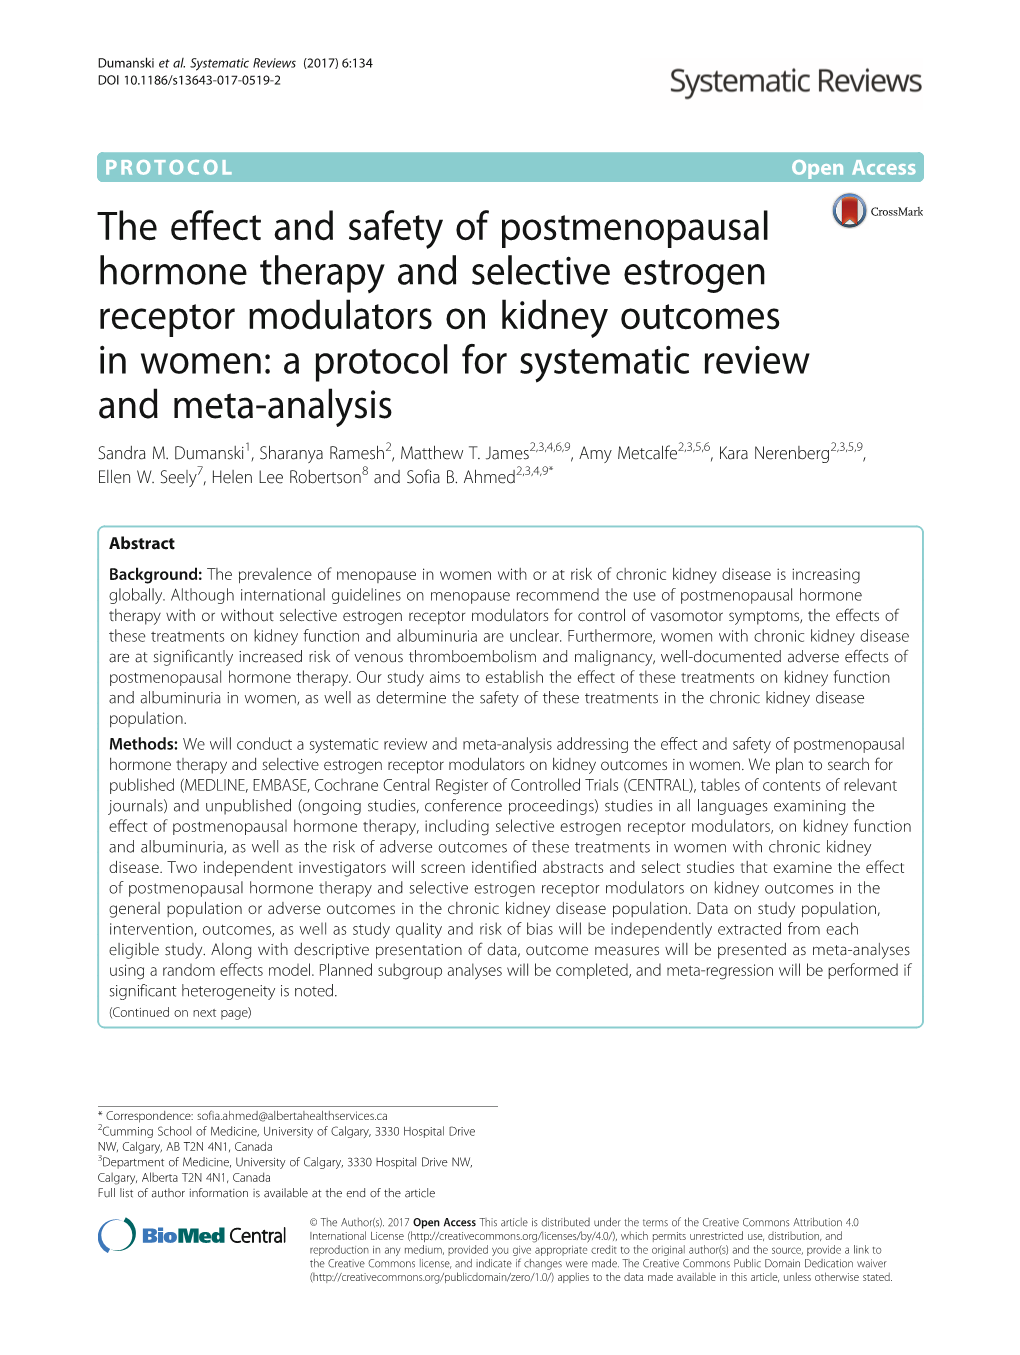 The Effect and Safety of Postmenopausal Hormone Therapy